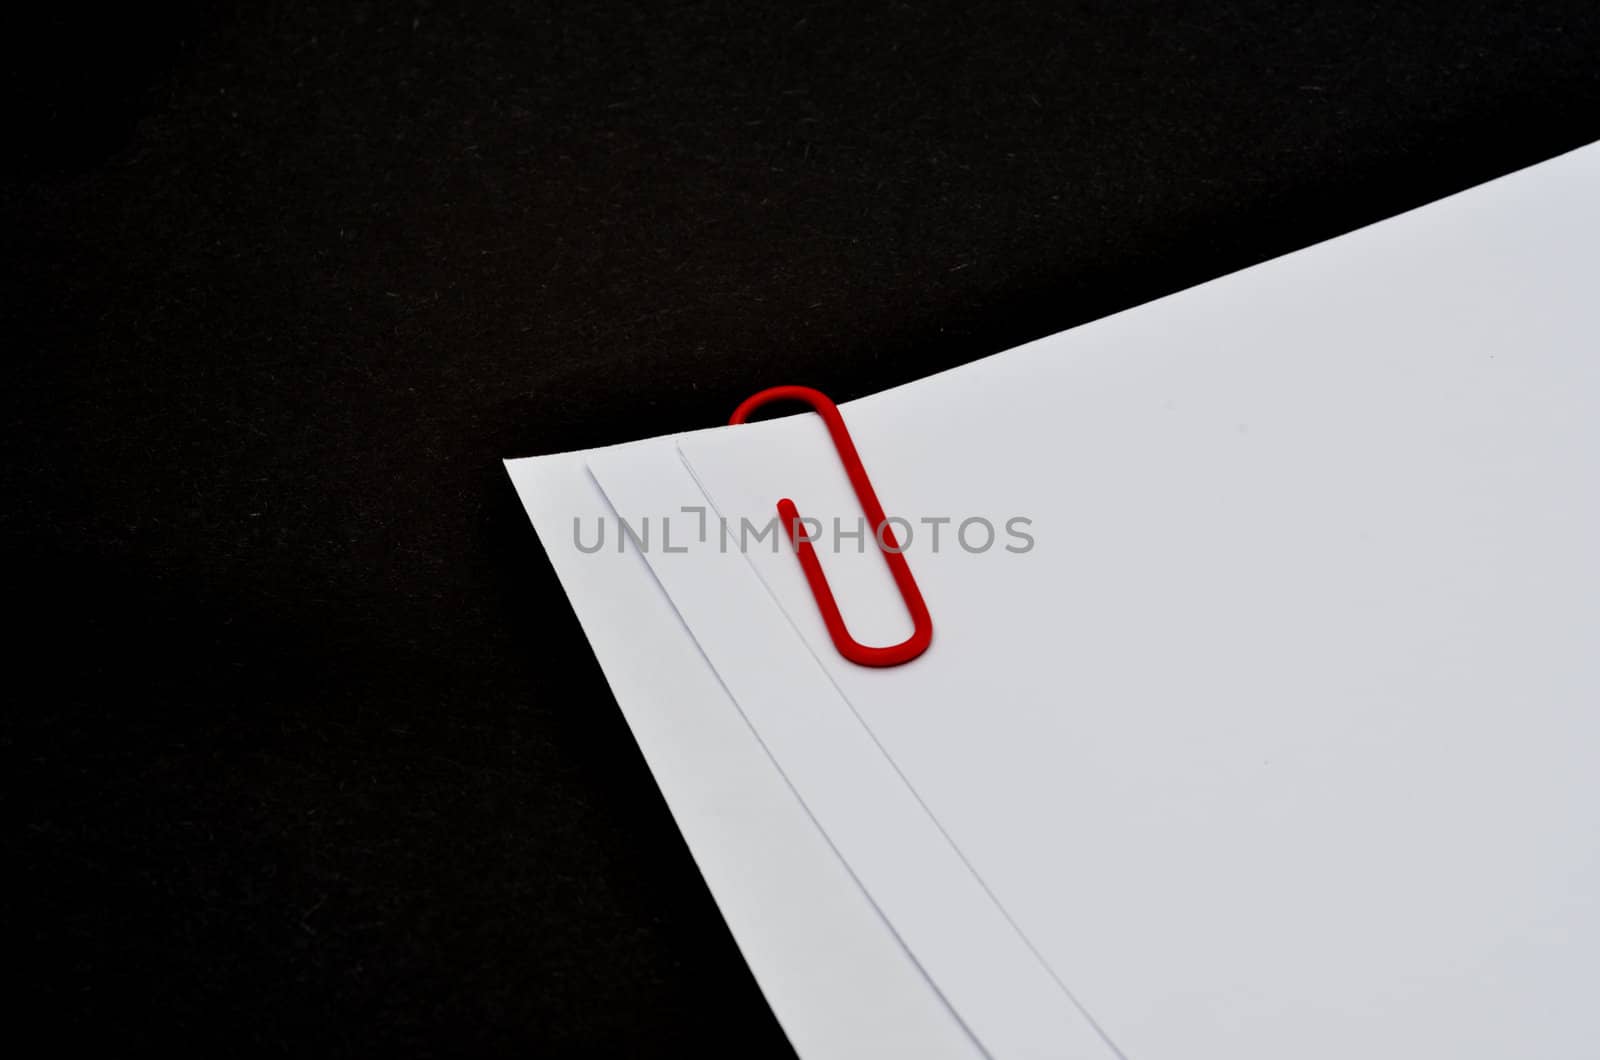 Paper clip on white paper with black background